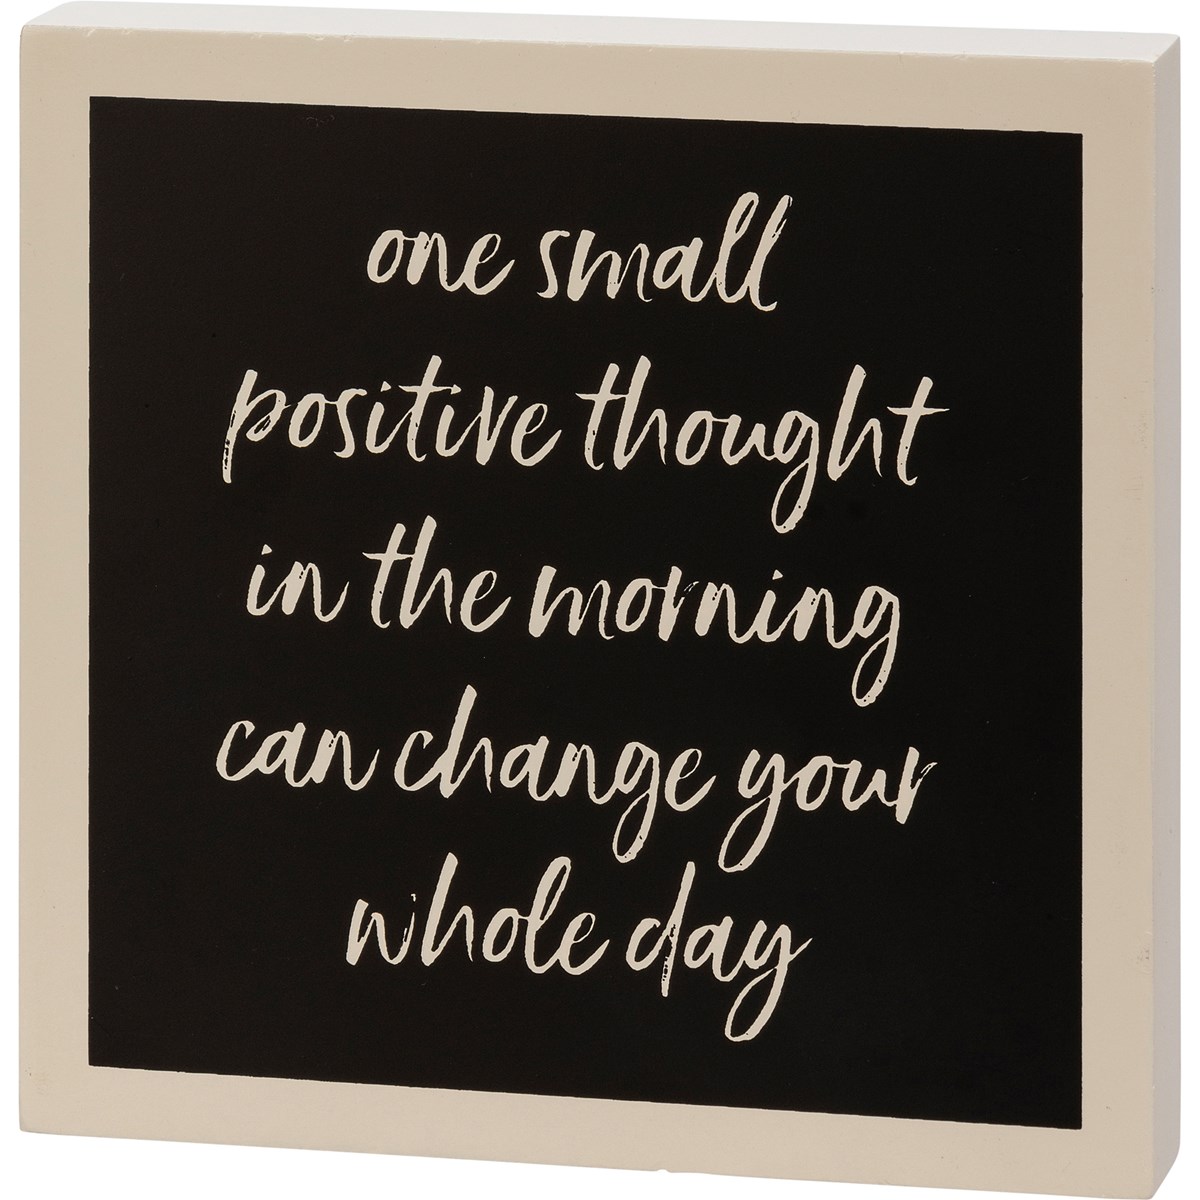 Block Sign - One Small Positive Thought - 6" x 6" x 1" - Wood